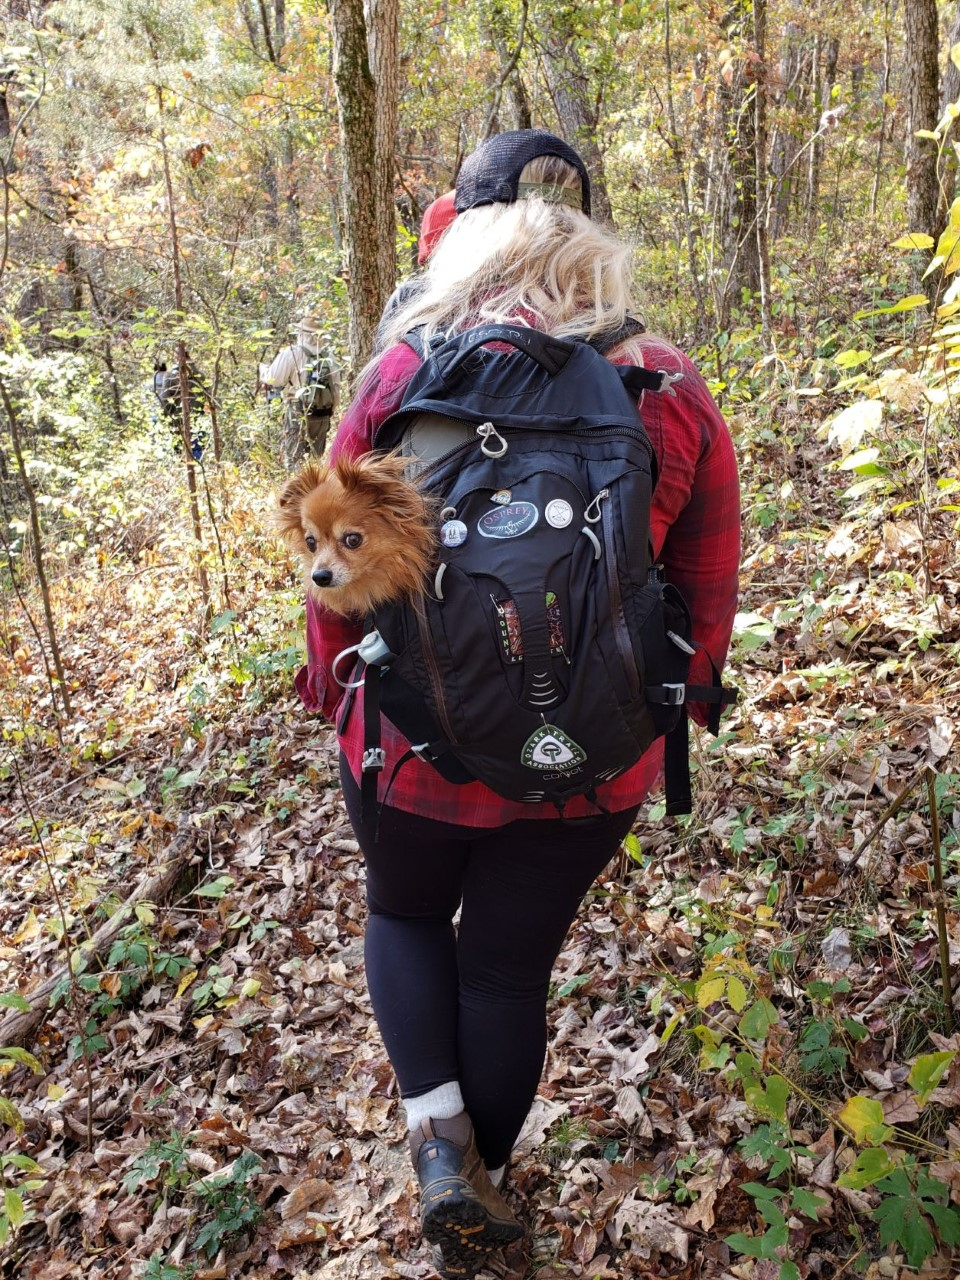 A hiker walks through a wooded forest with a backpack and in the backpack is a small dog zipped up with only its head showing.